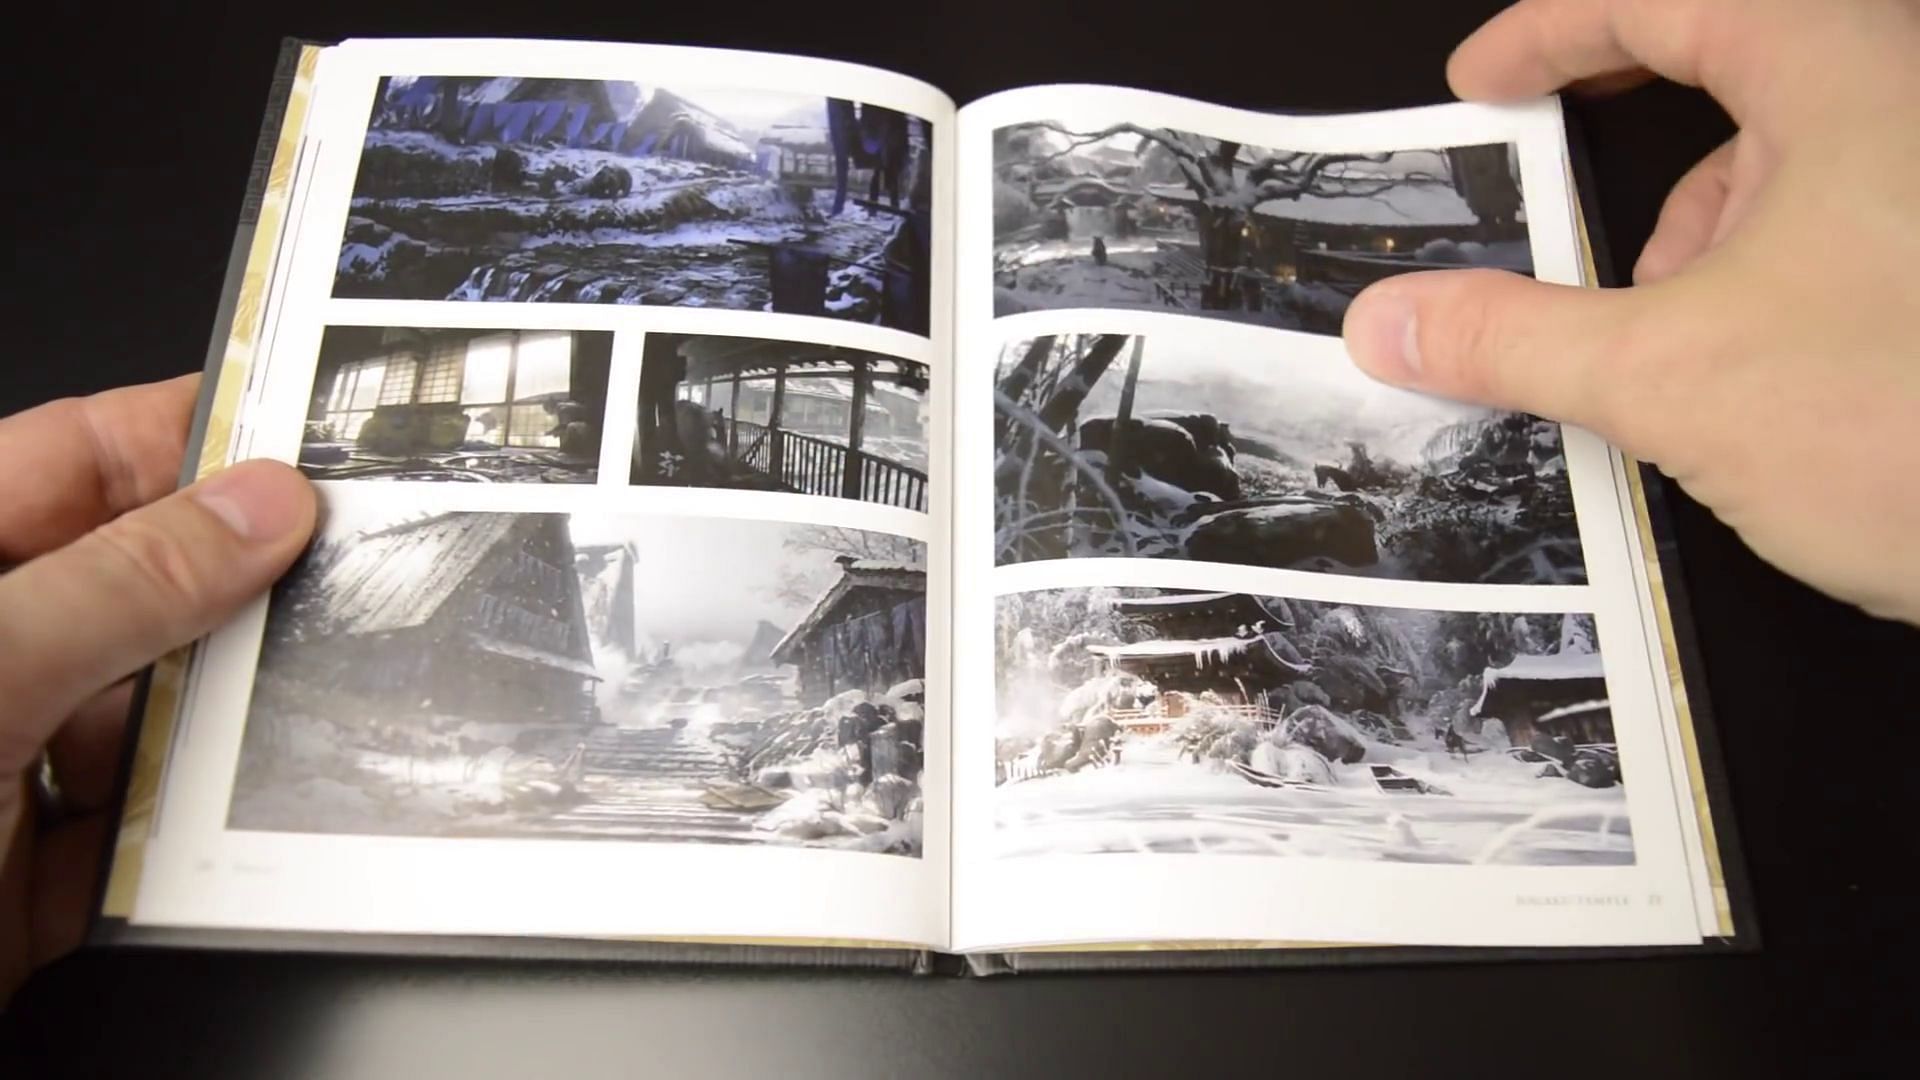 A glimpse into the book titled The Art of Ghost of Tsushima (Image via YouTube/finngamer)